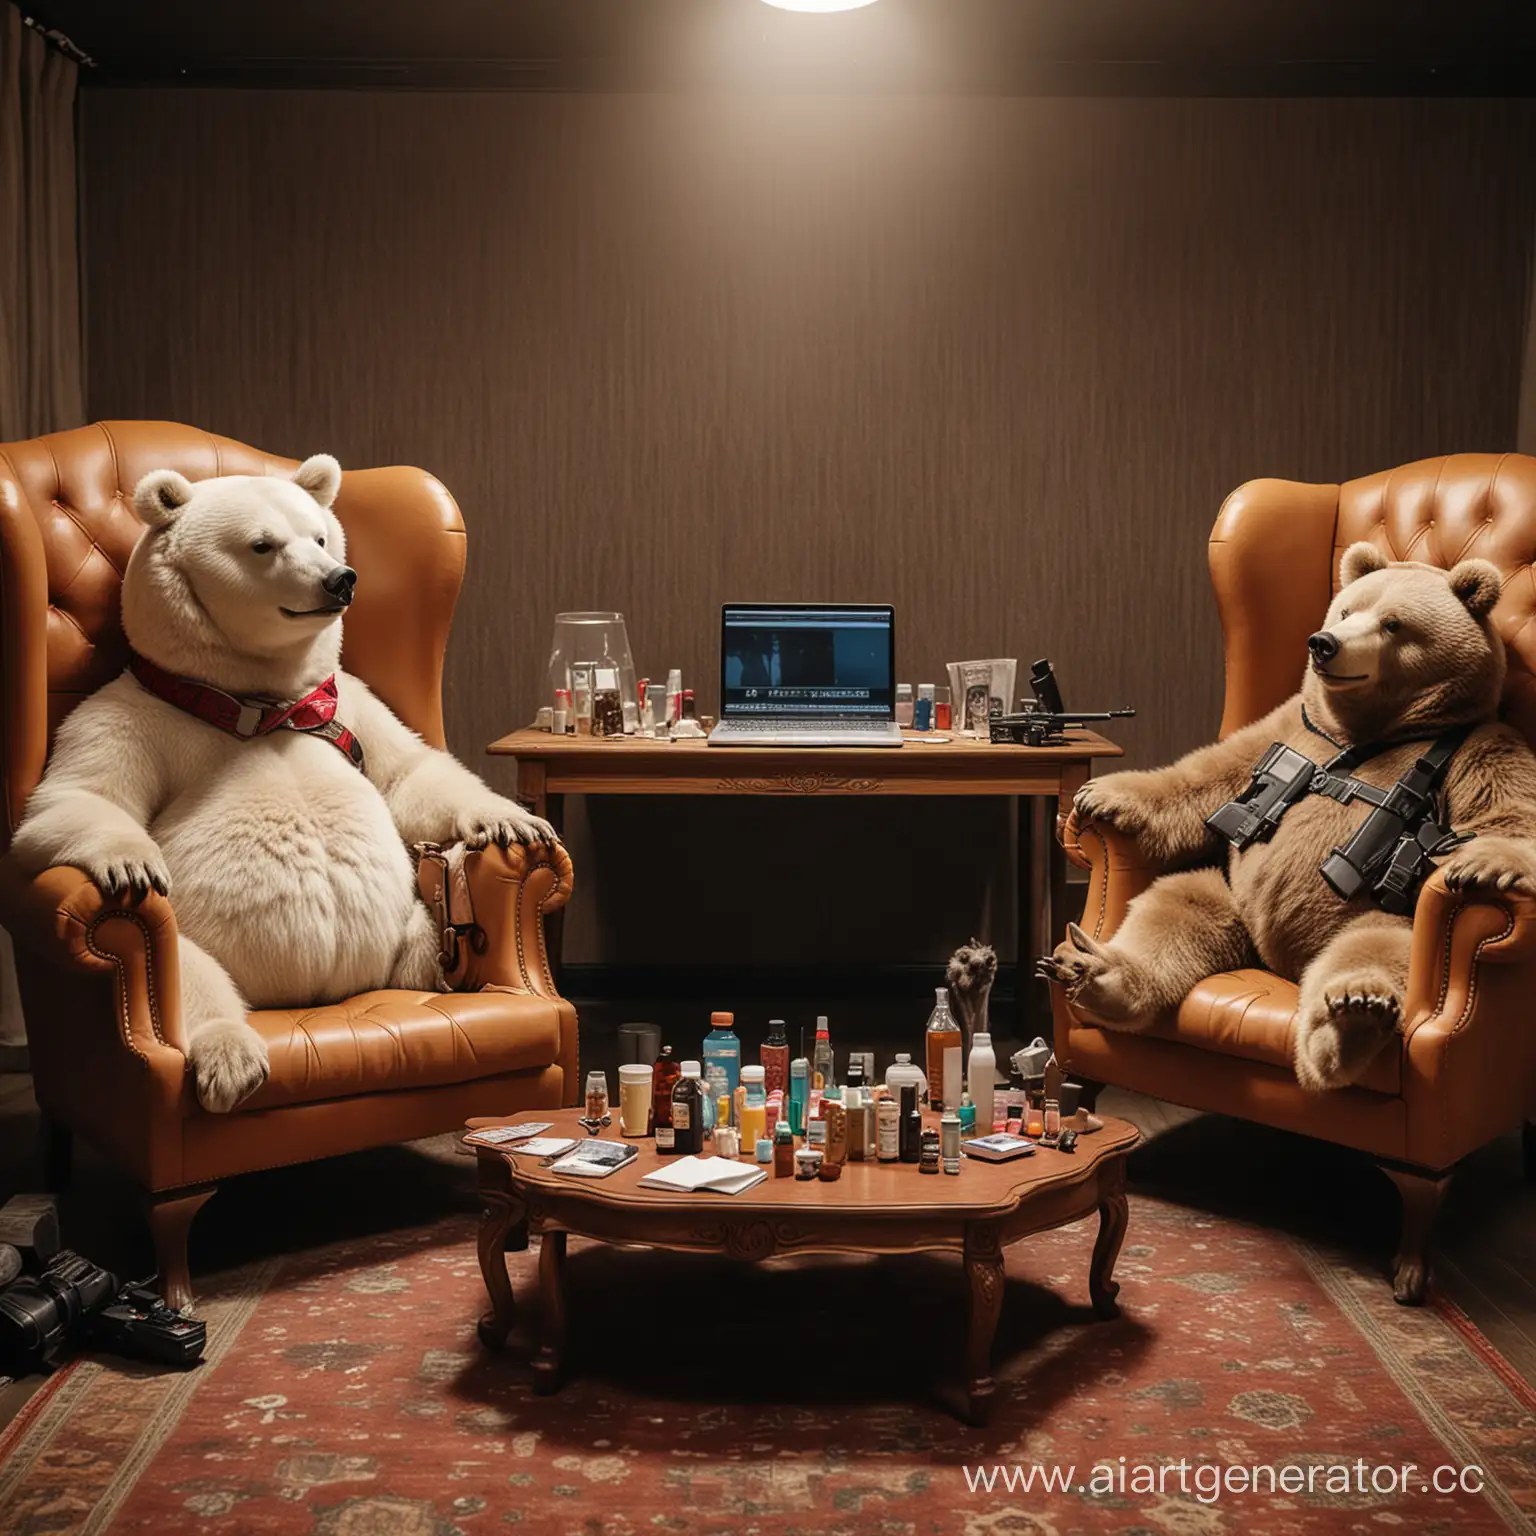 Goose-and-Bear-Relaxing-in-Luxurious-Studio-with-Drugs-Laptop-and-Guns